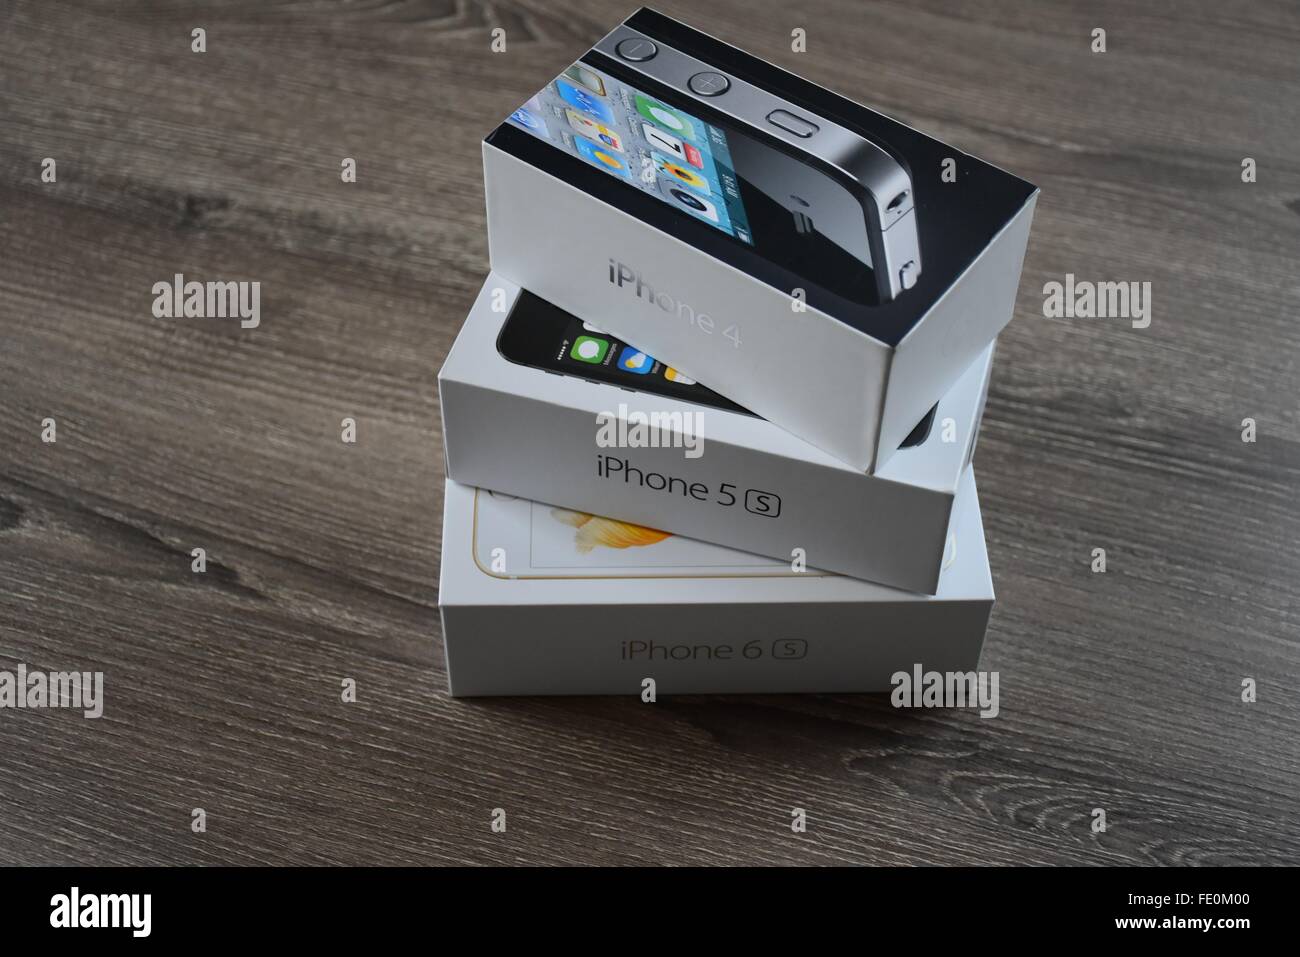 Apple iPhone box on a wood surface Stock Photo